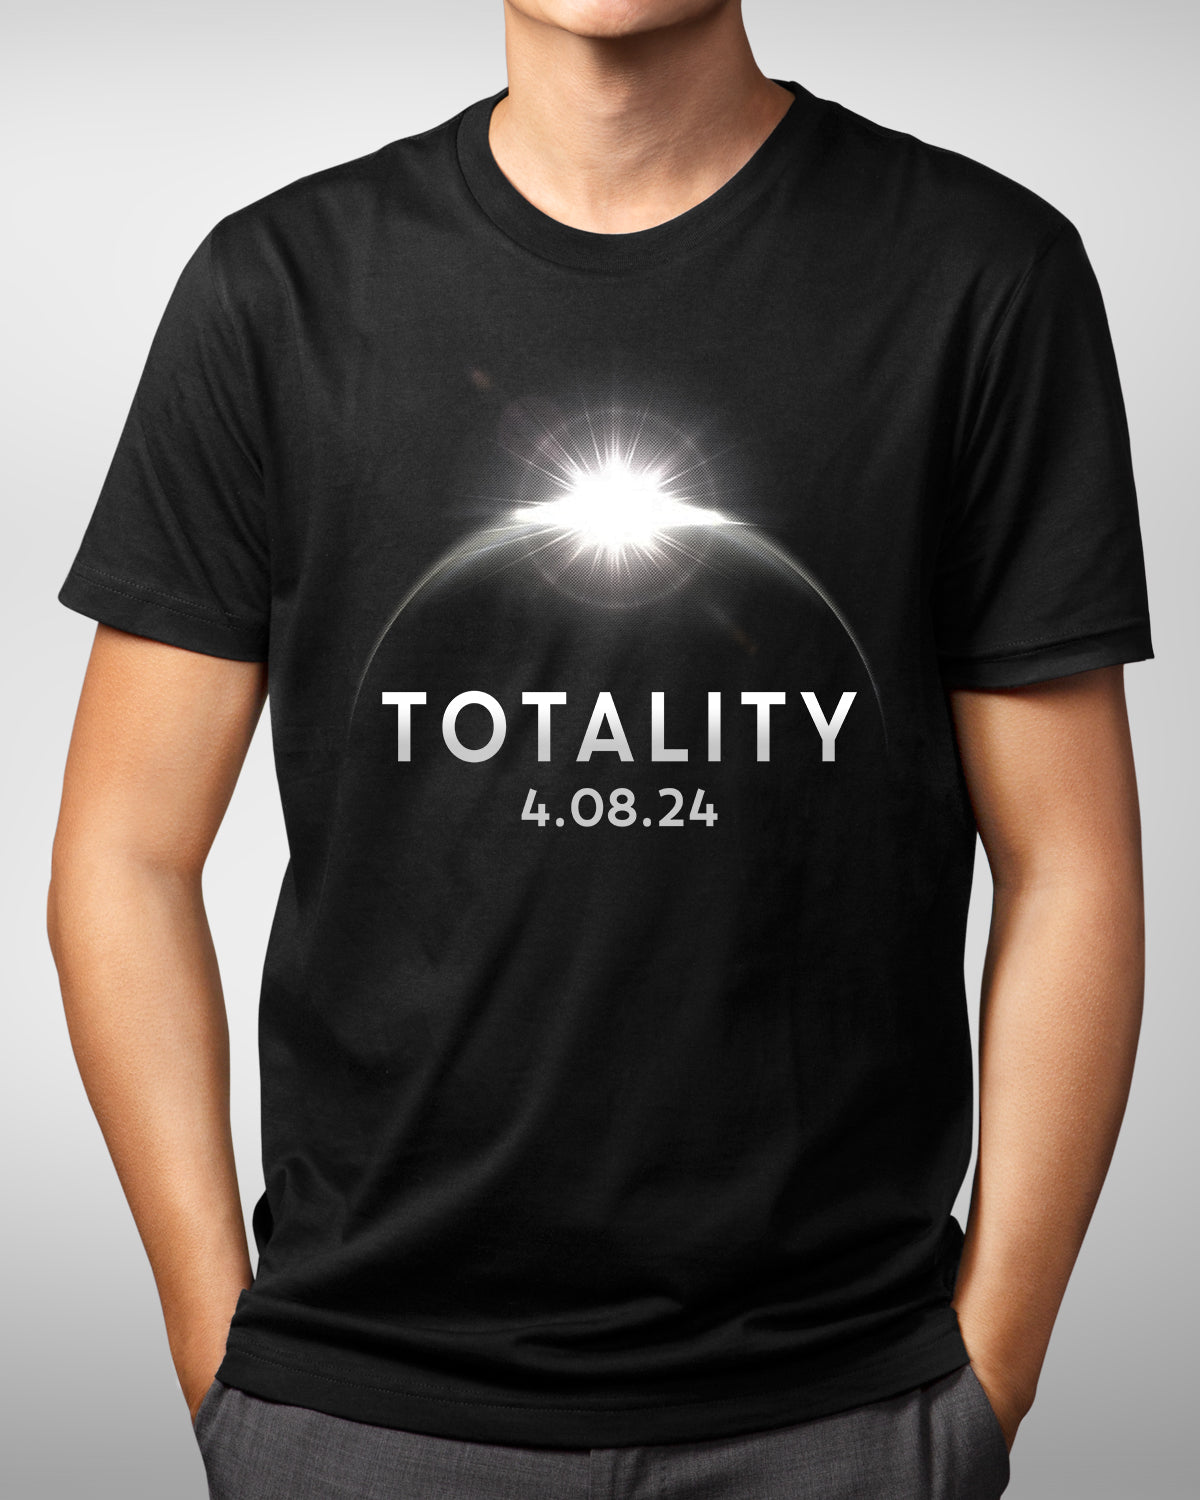 Total Solar Eclipse Shirt - 04 08 2024 - Path of Totality